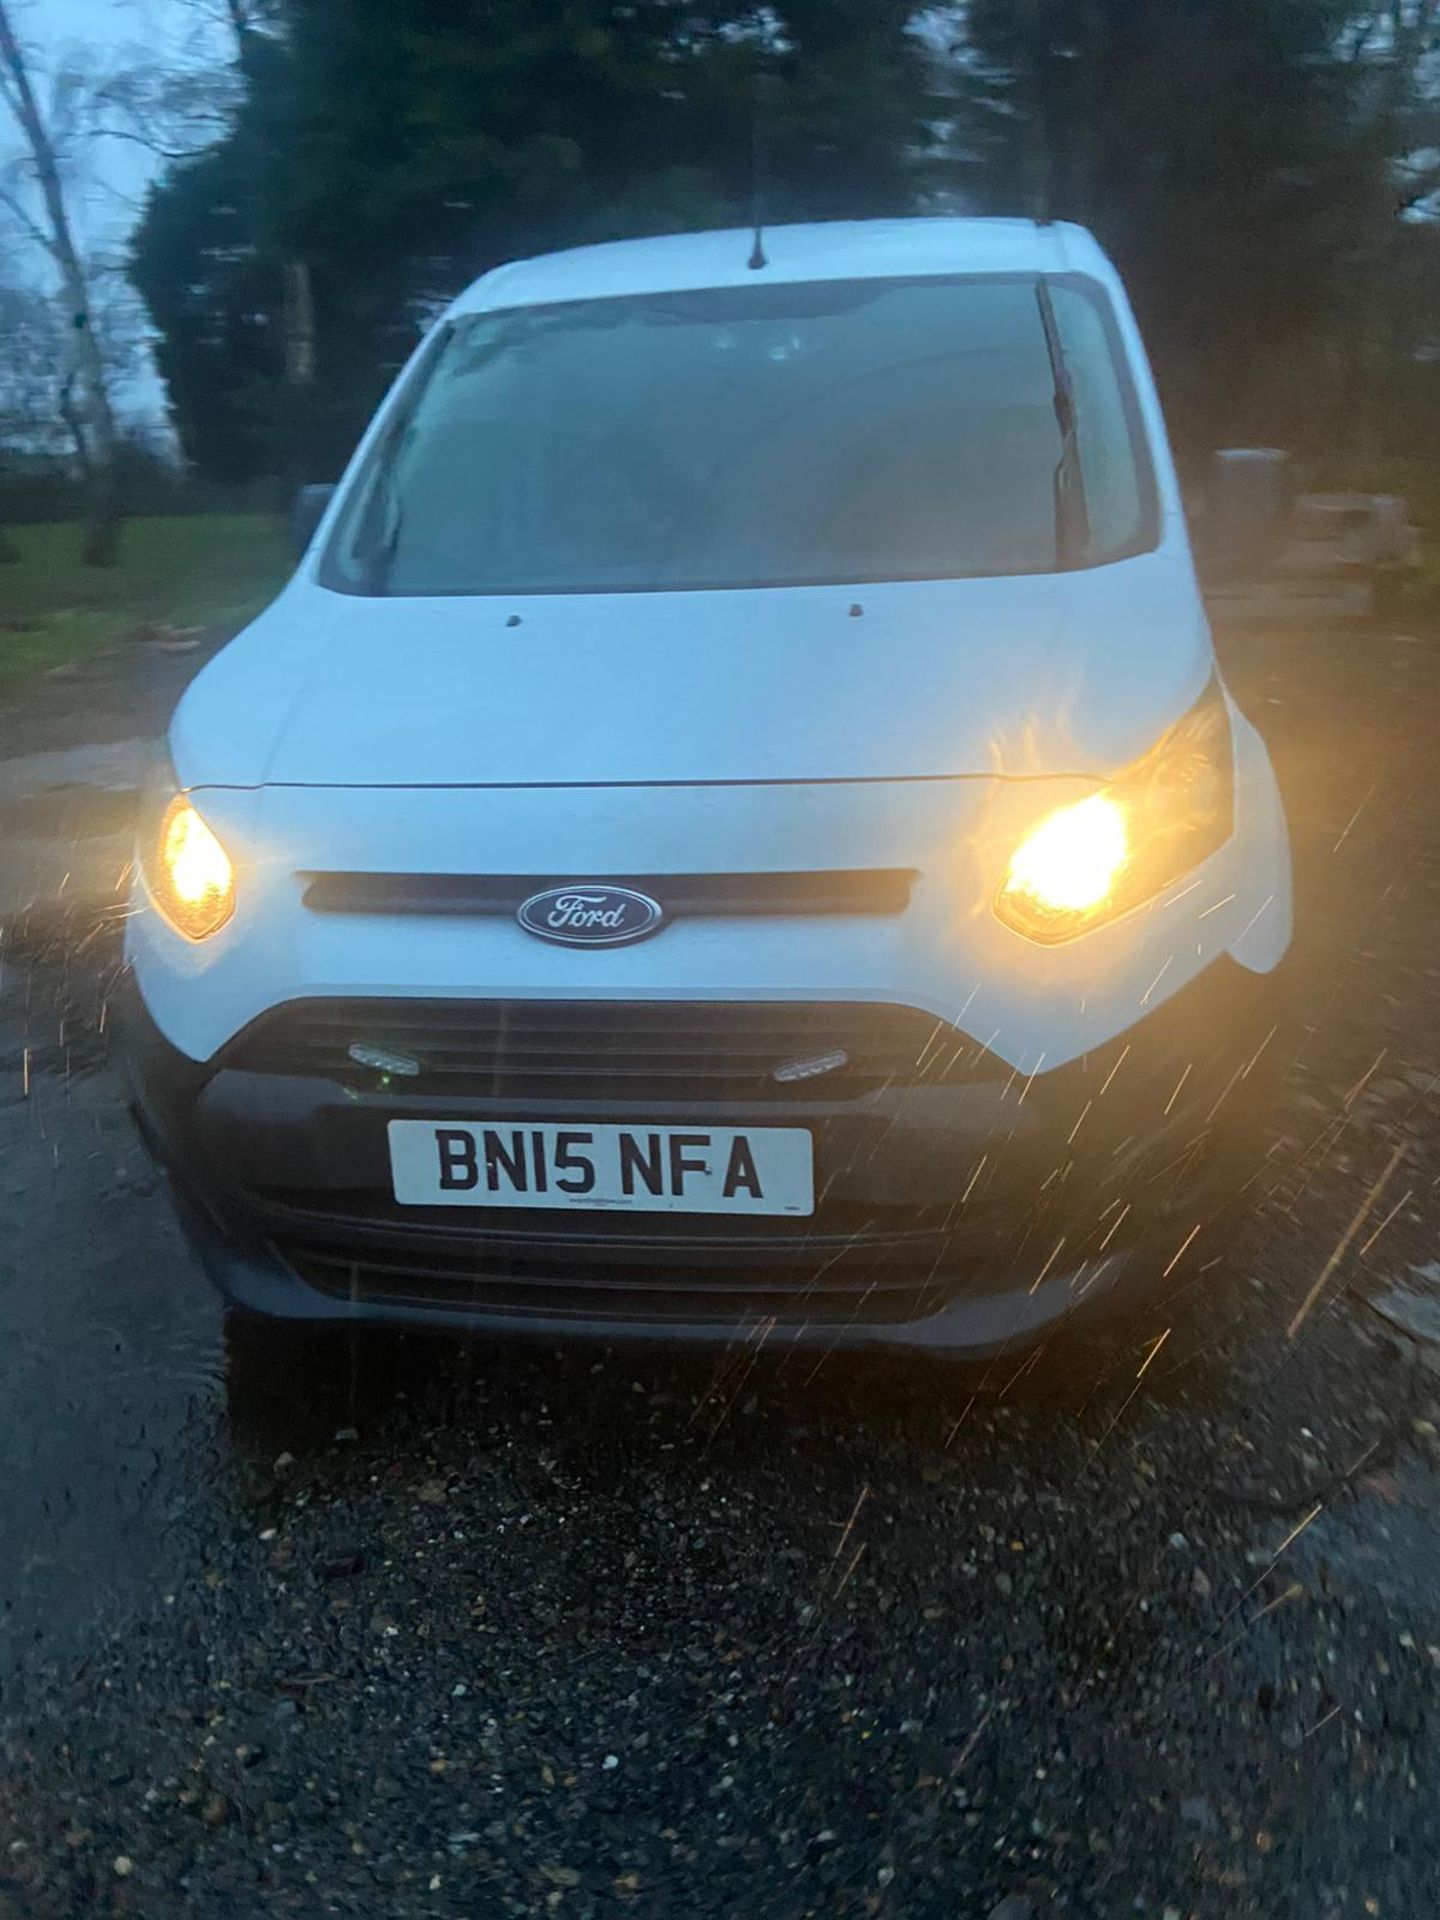 2015/15 REG FORD TRANSIT CONNECT 200 ECONETIC 1.6 DIESEL WHITE PANEL VAN, SHOWING 0 FORMER KEEPERS - Image 2 of 9